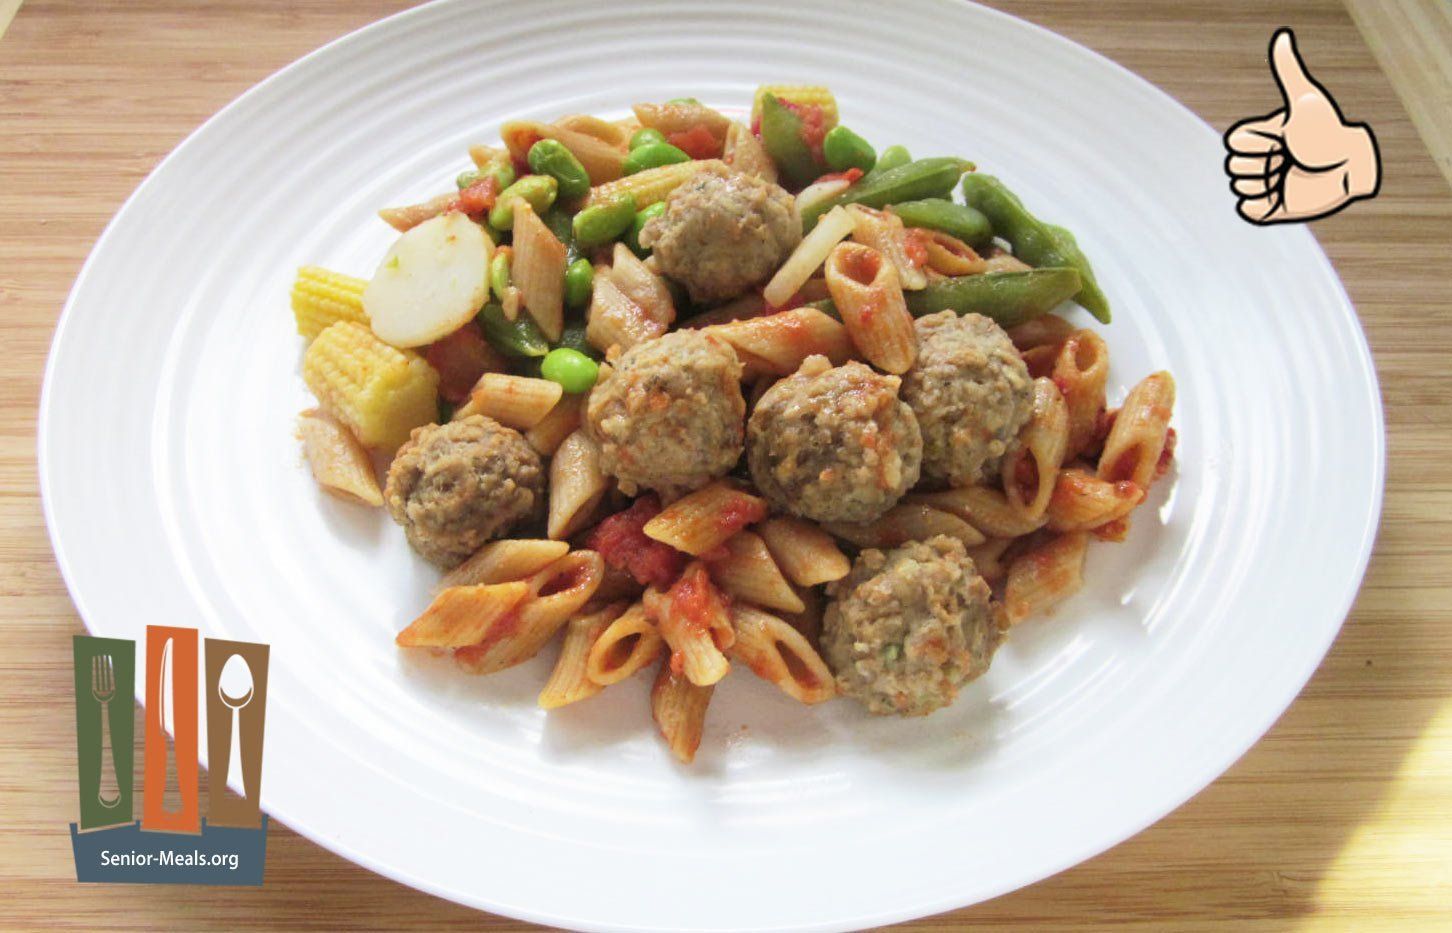 Italian Pork and Beef Meatball Pasta - The Meatballs are Frozen, but the Meal is Good. You Get More Meatballs than Other Companies Give.